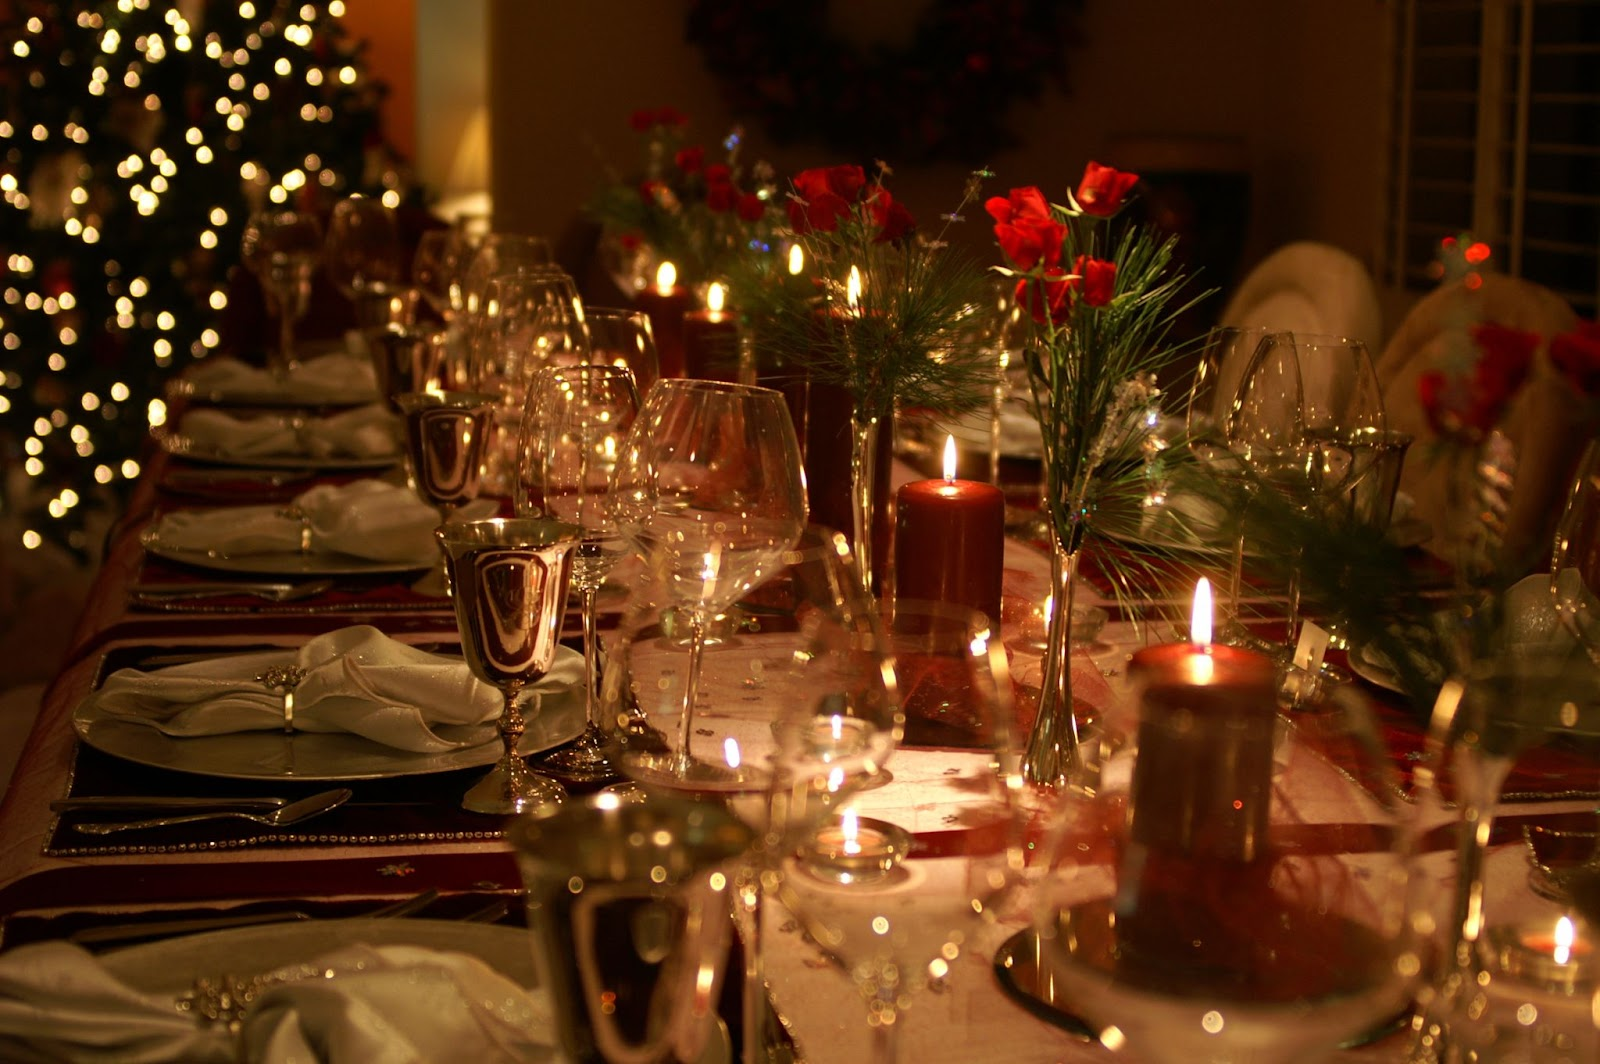 Christmas dinner spread with red candles and flowers in the centre of ornate table.